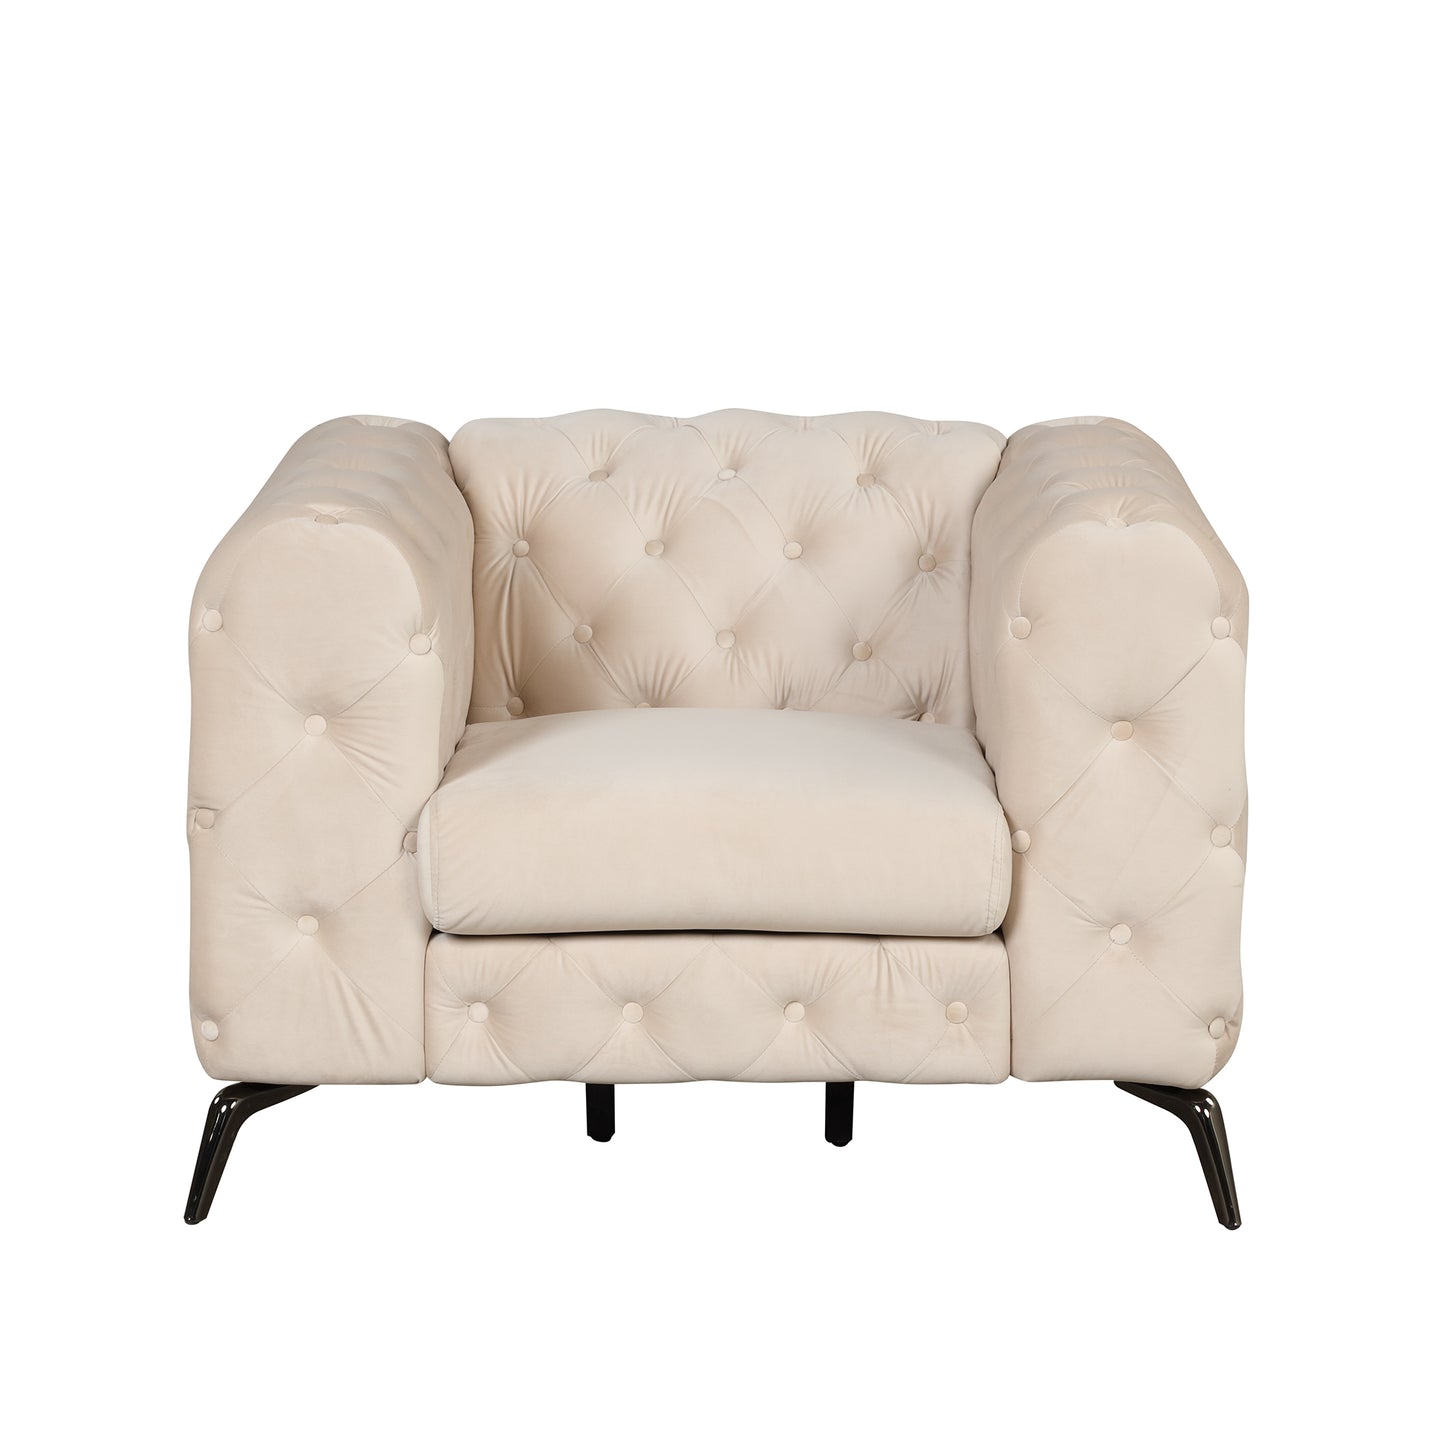 Velvet Upholstered Accent Chair with Button Tufted Back, Ideal for Living Room, Bedroom, or Small Spaces - 40.5 Inch, Beige